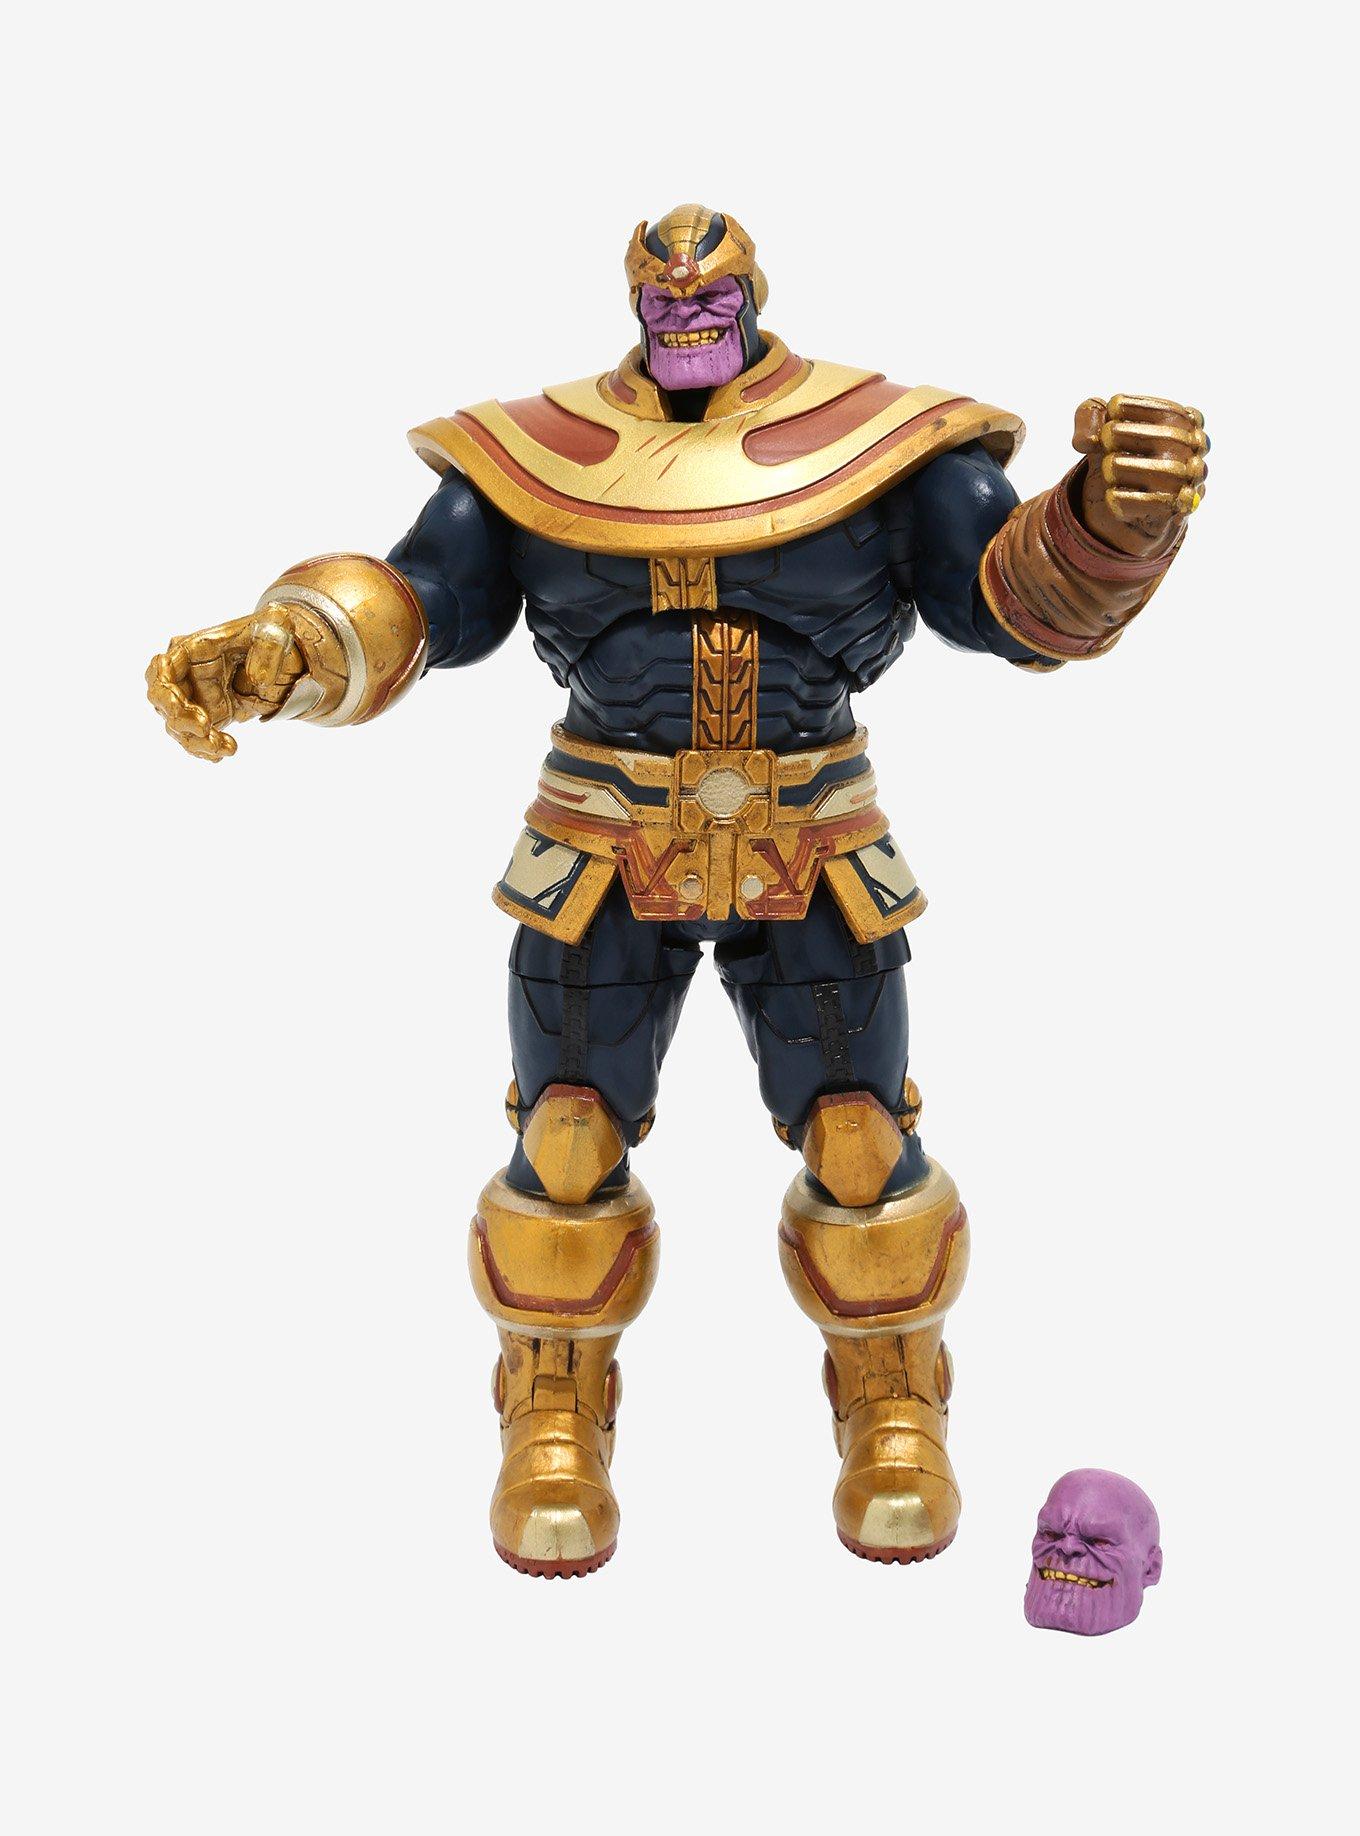 Diamond Select Toys Marvel Select Thanos Collector Edition Disney Store  Exclusive Action Figure